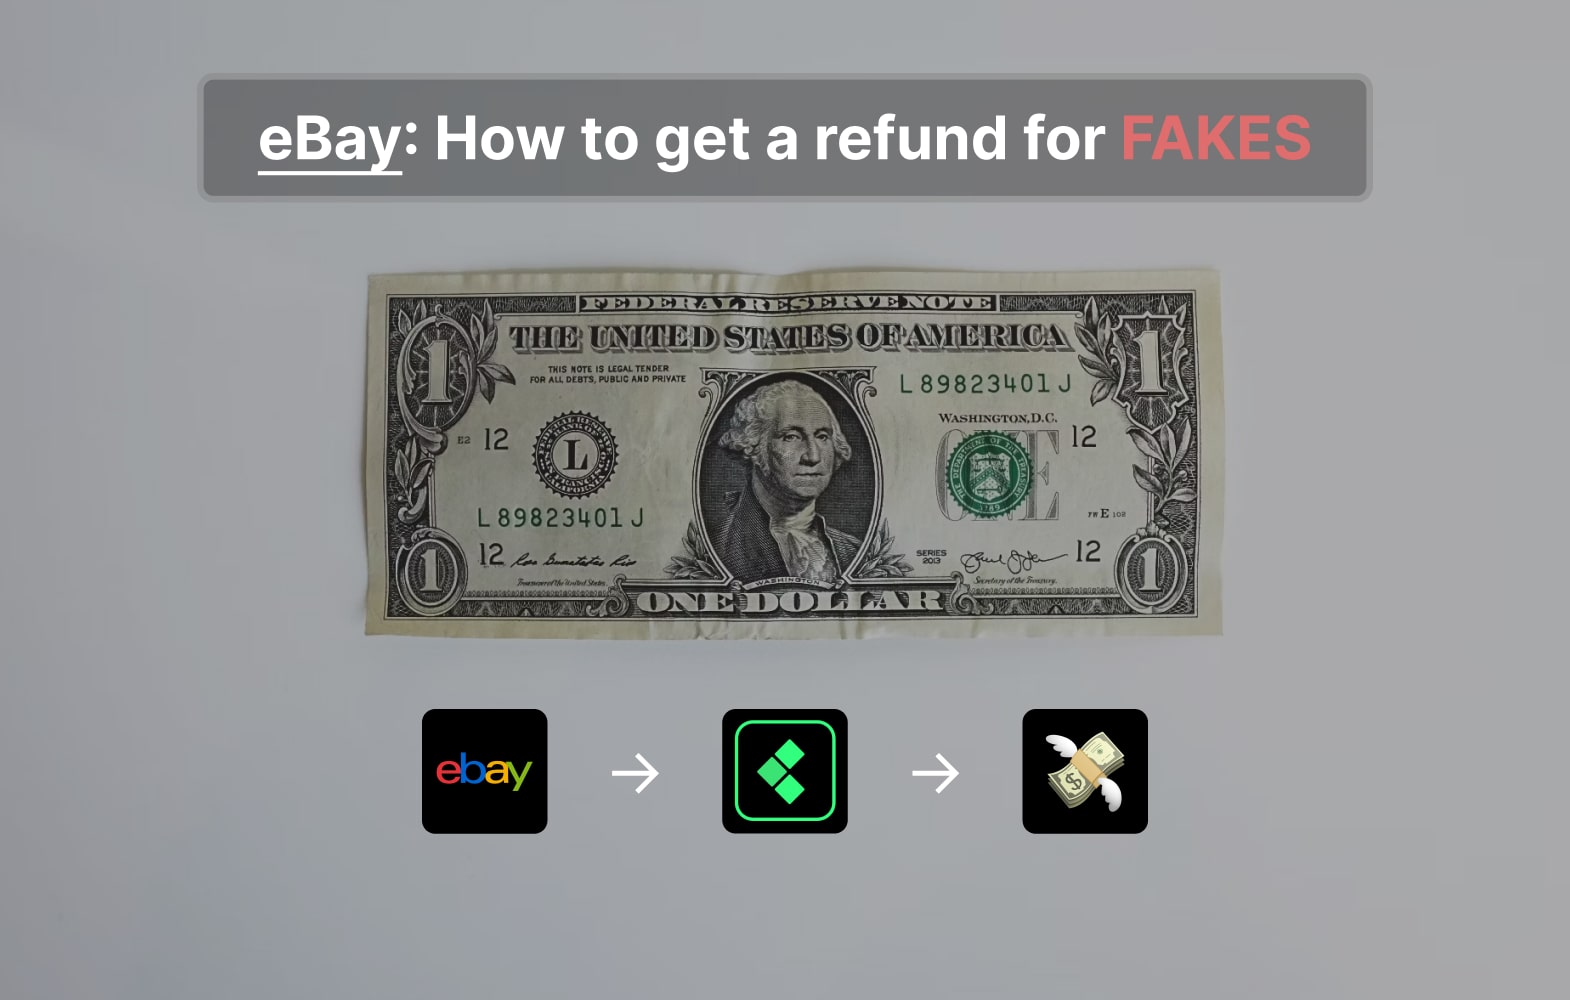 How to get refunded for fakes on eBay